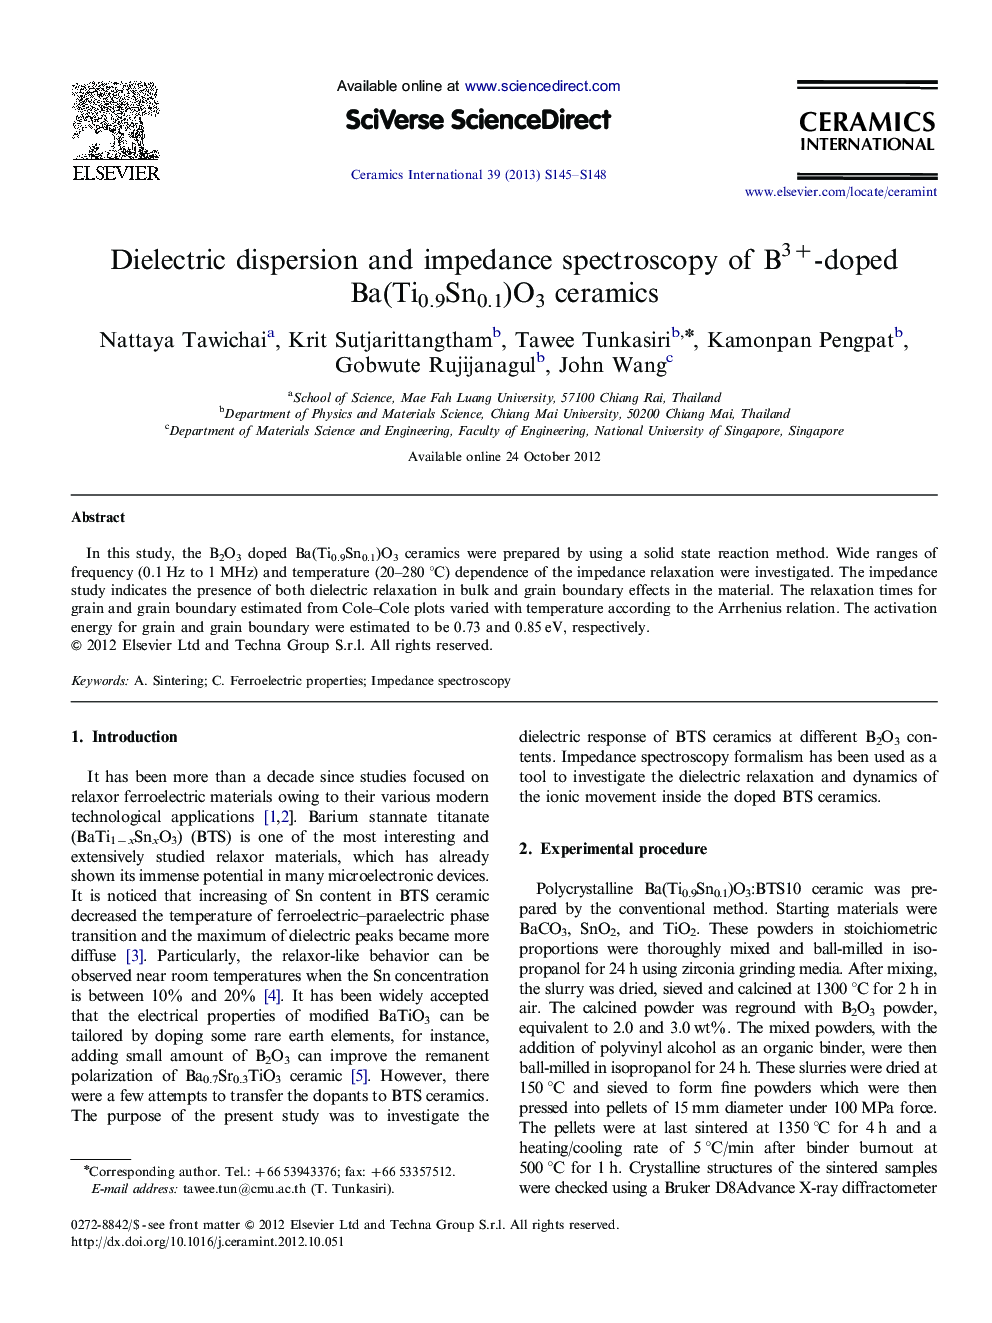 Dielectric dispersion and impedance spectroscopy of B3+-doped Ba(Ti0.9Sn0.1)O3 ceramics